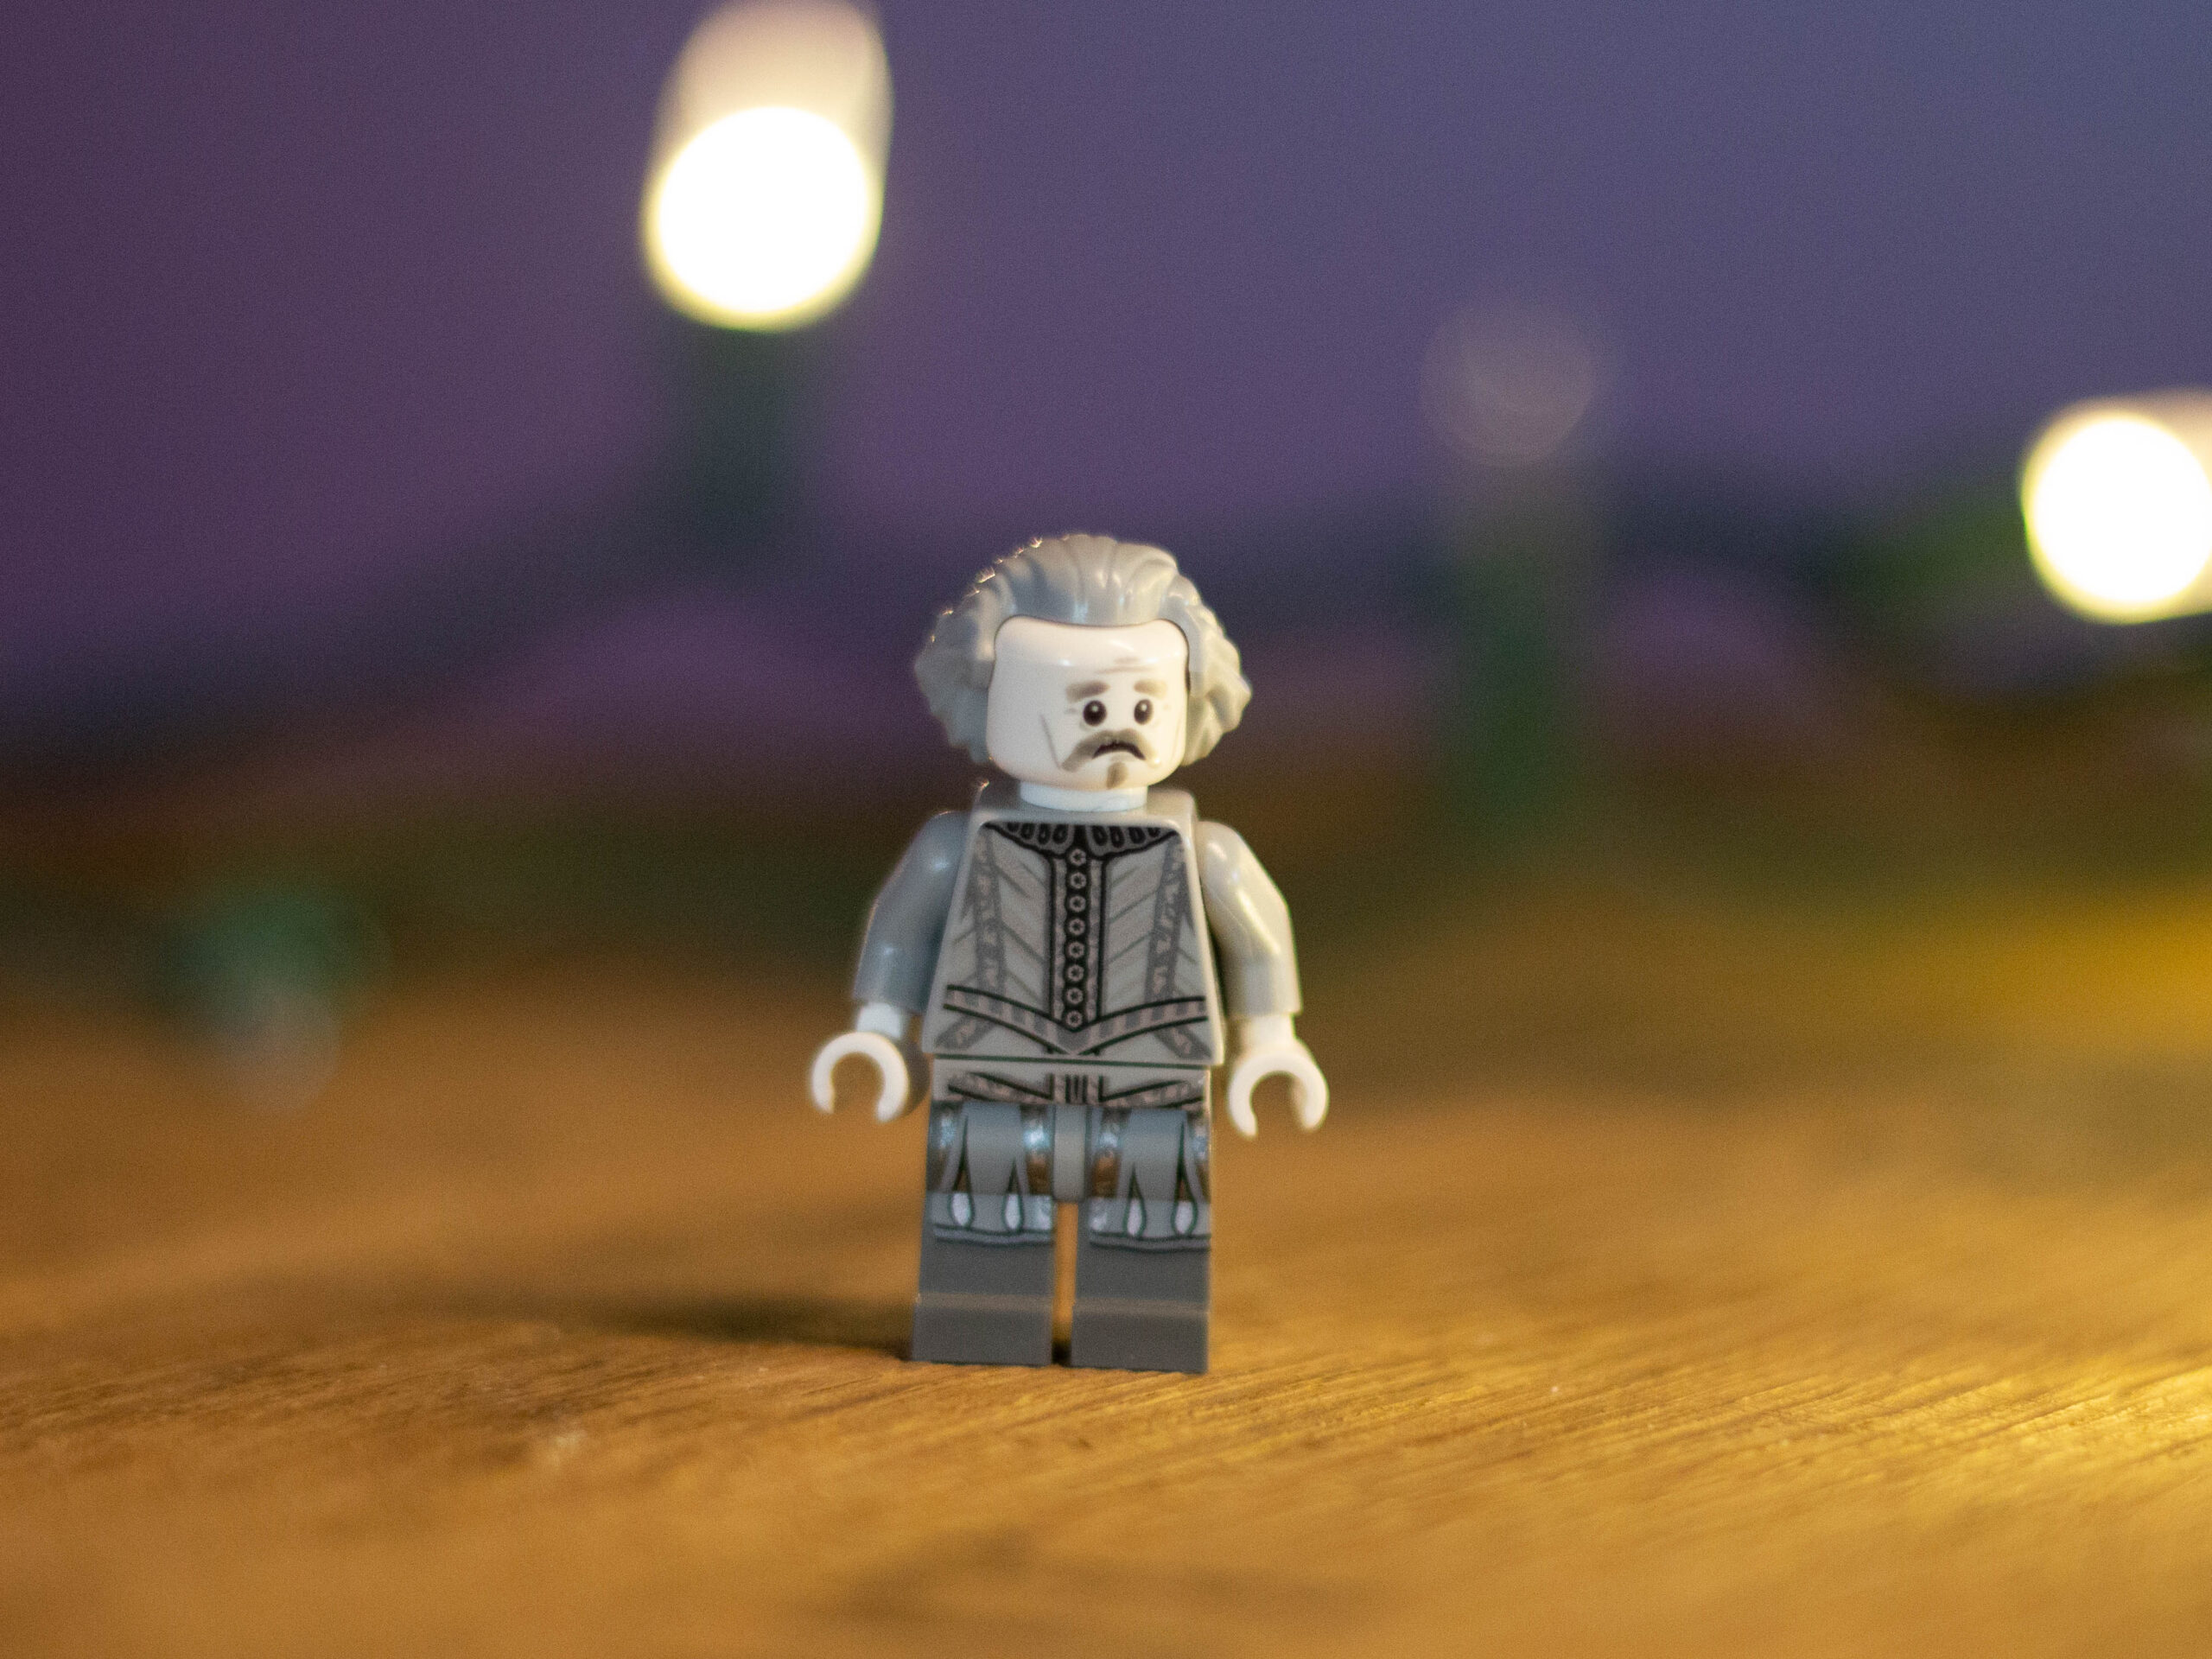 Older looking lego figure with grey hair standing on a wooden tables with a concerned look on its face